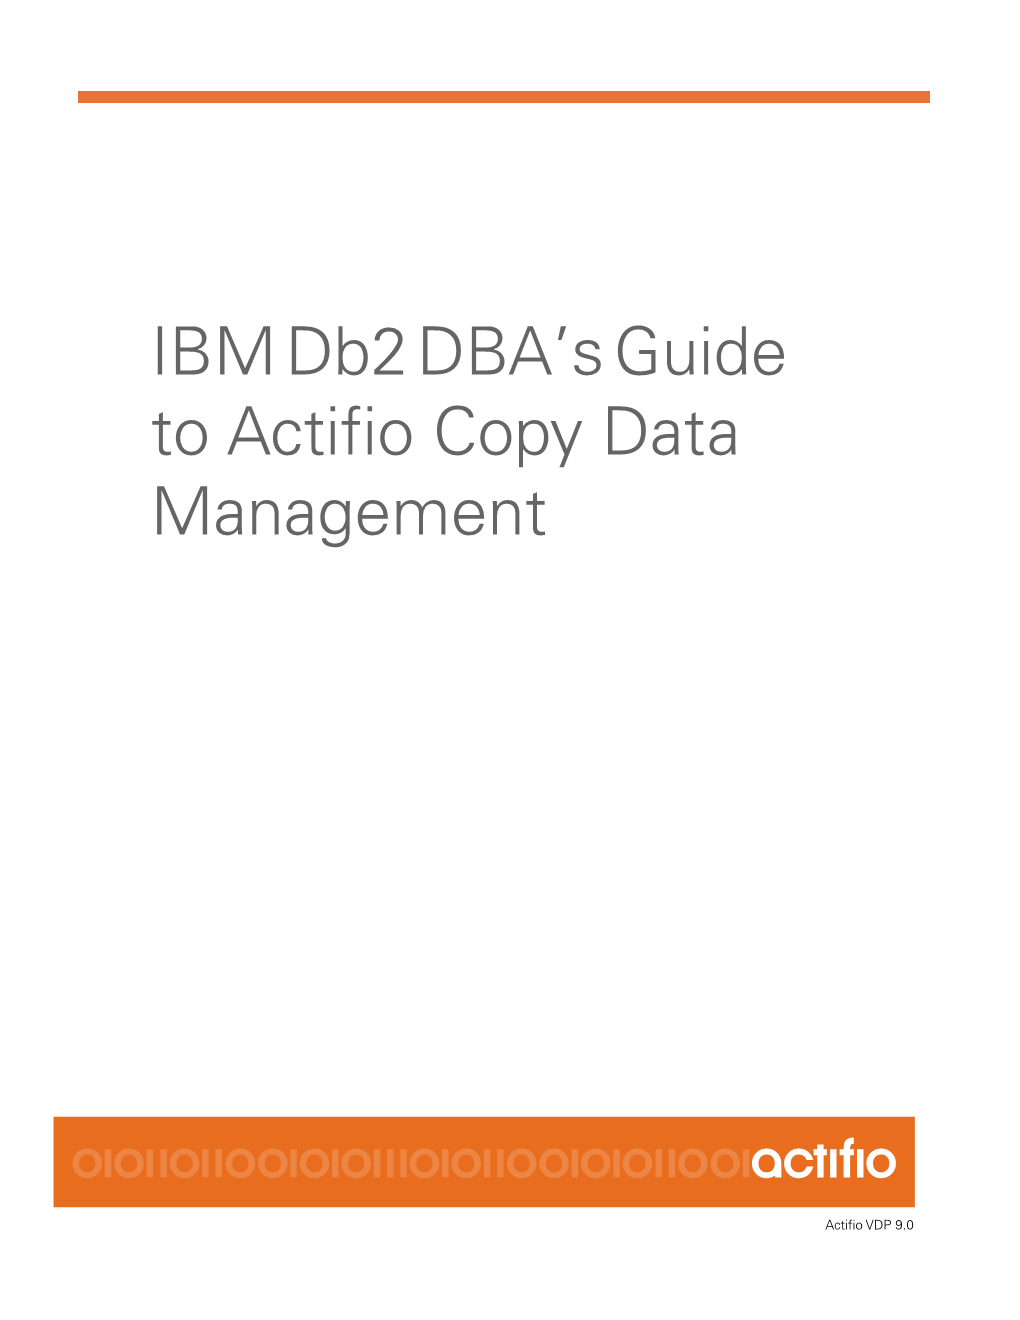 An IBM Db2 DBA's Guide to Actifio Copy Data Management